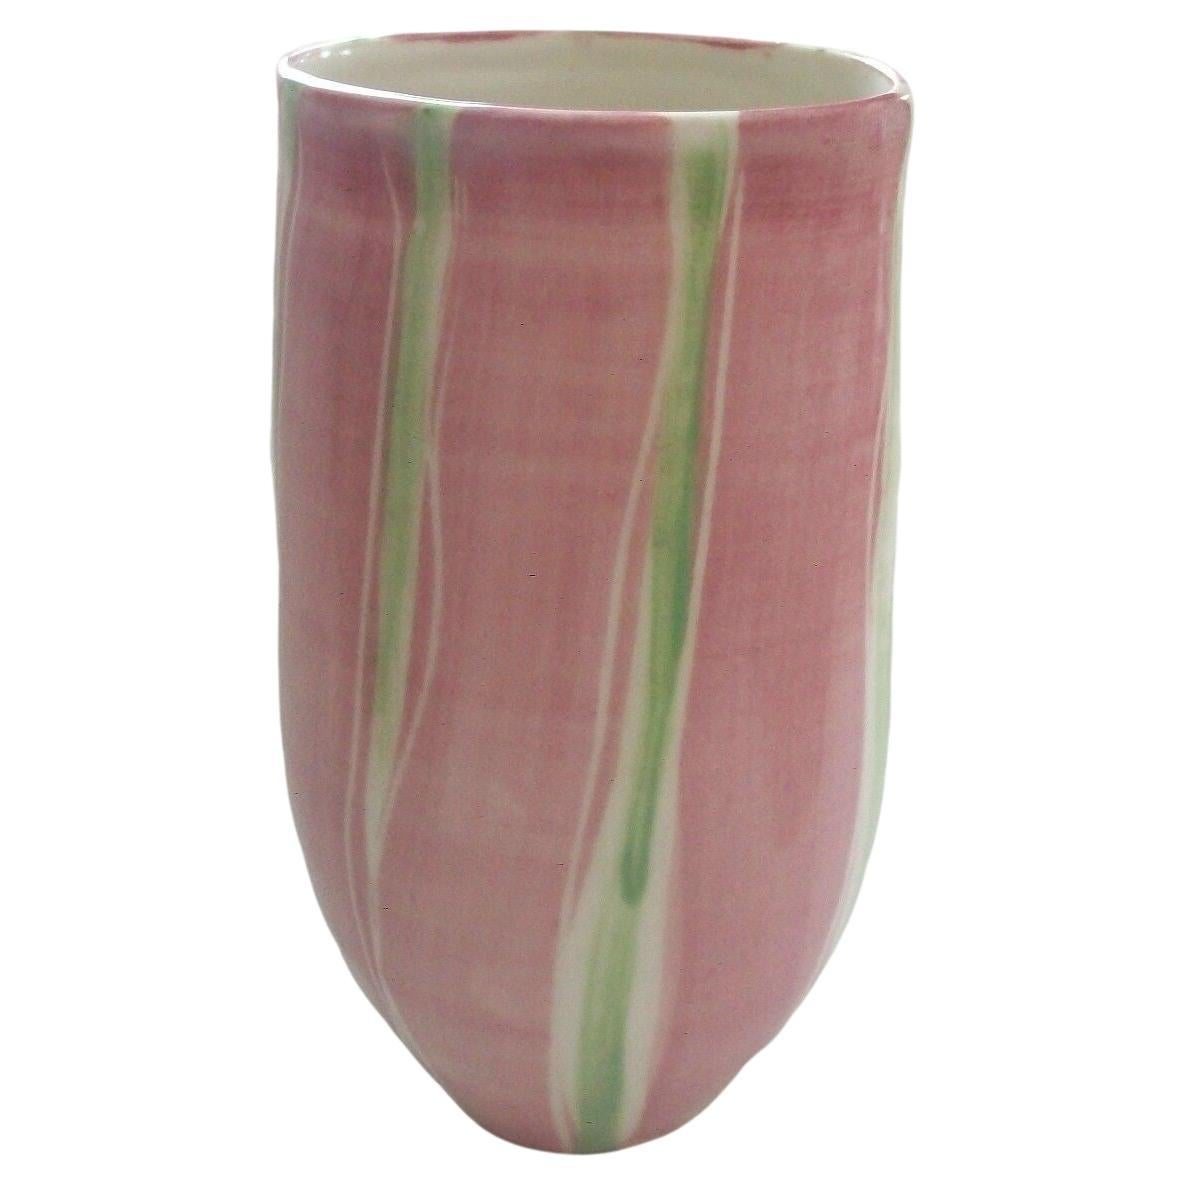 Hand Painted Wheel Thrown & Manipulated Porcelain Vase by Bender, 20th Century For Sale